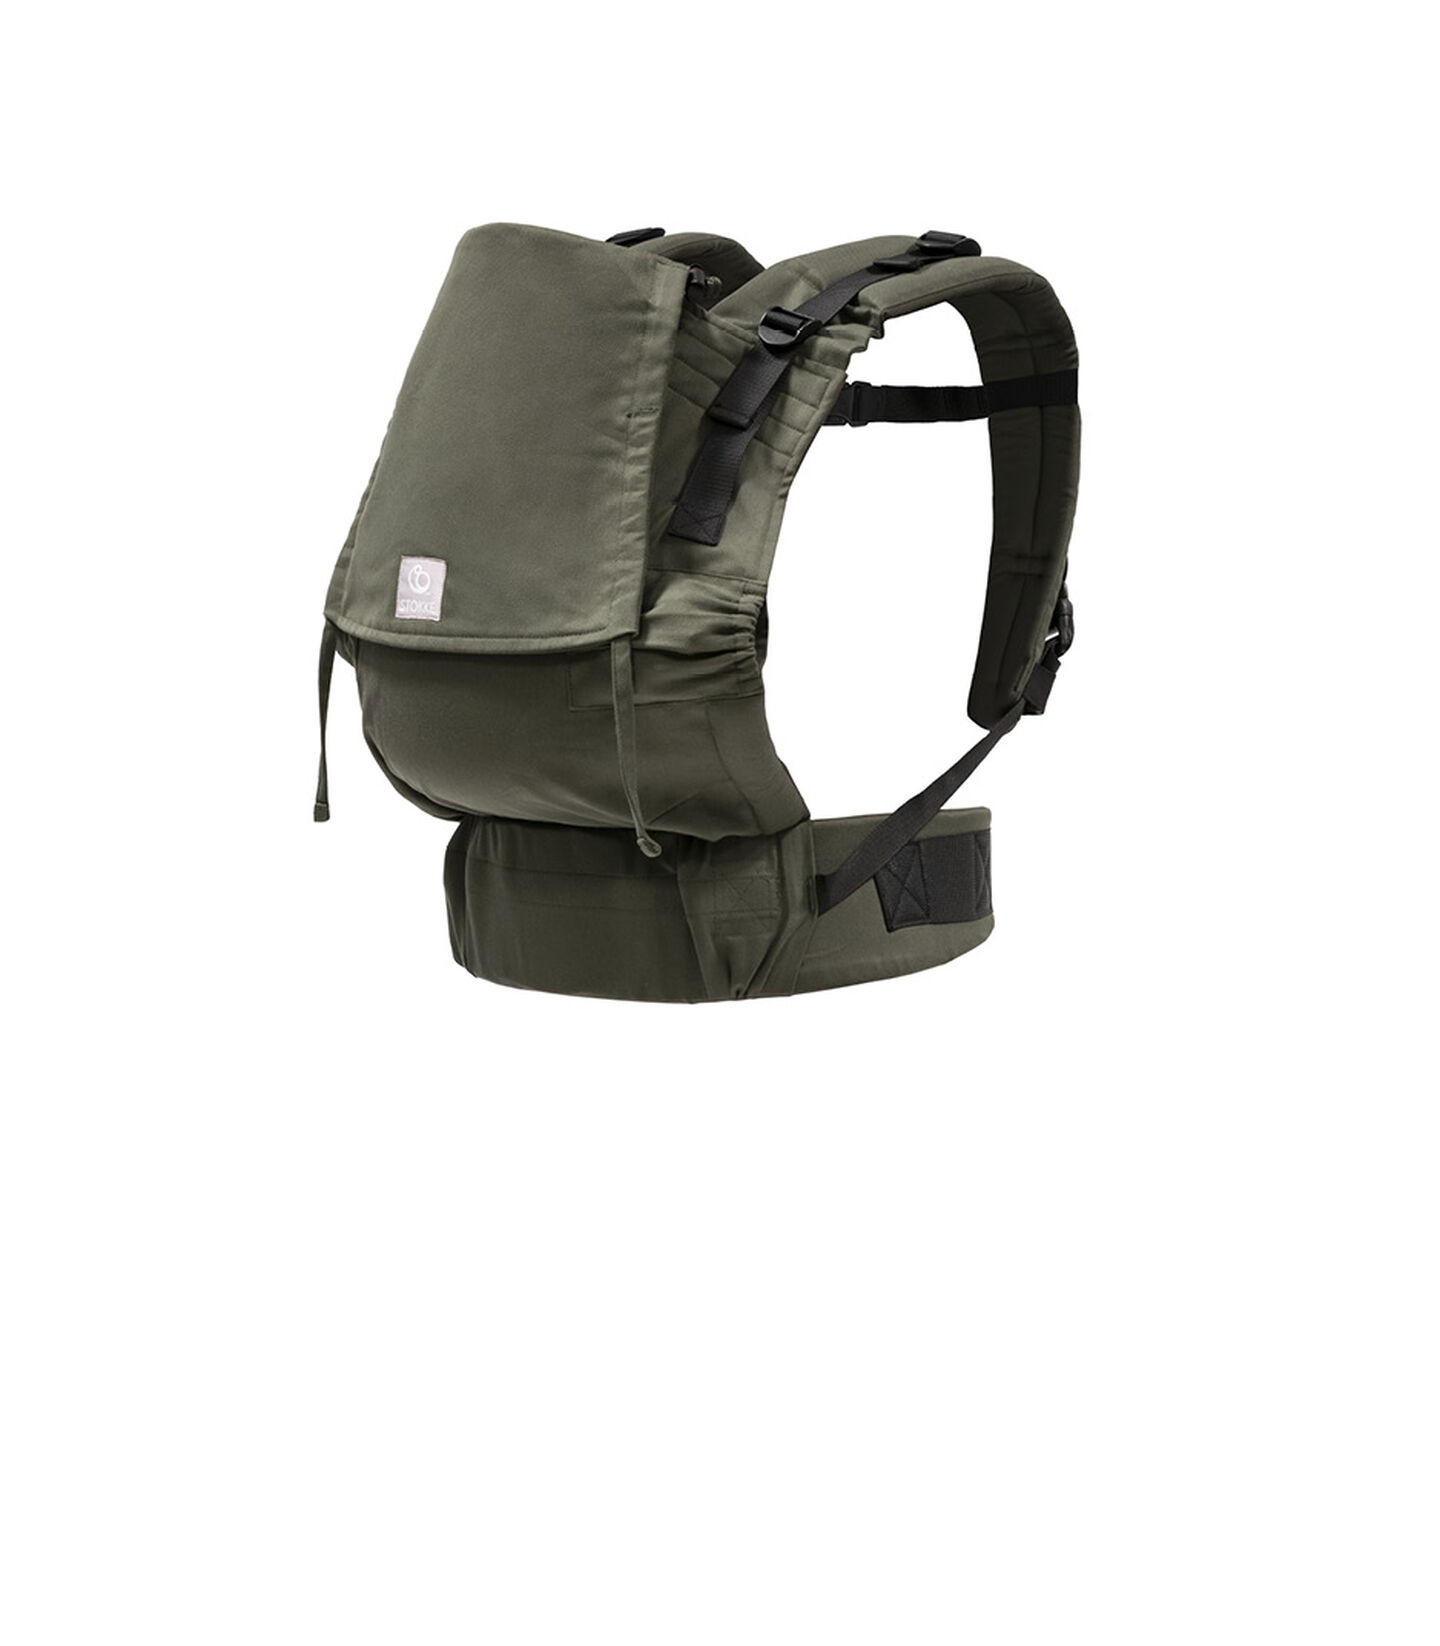 Stokke® Limas™ Bärsele Flex Olive Green, Olive Green, mainview view 1